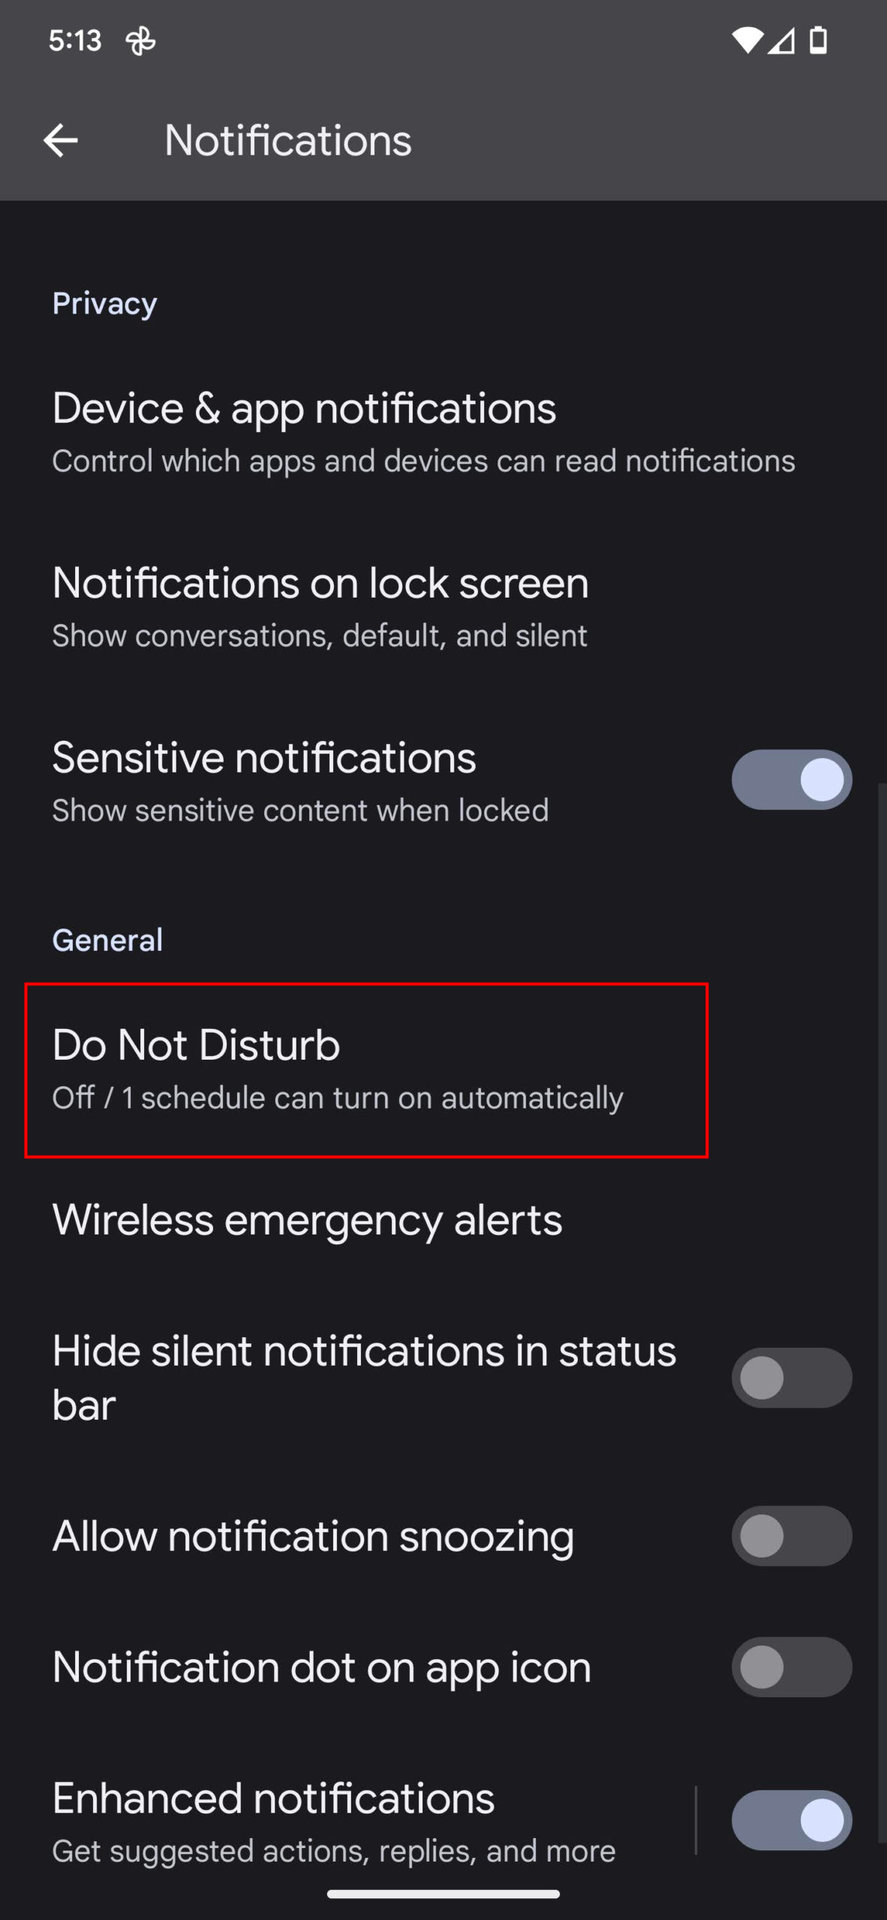 Schedule Do Not Disturb to turn on and off automatically 2